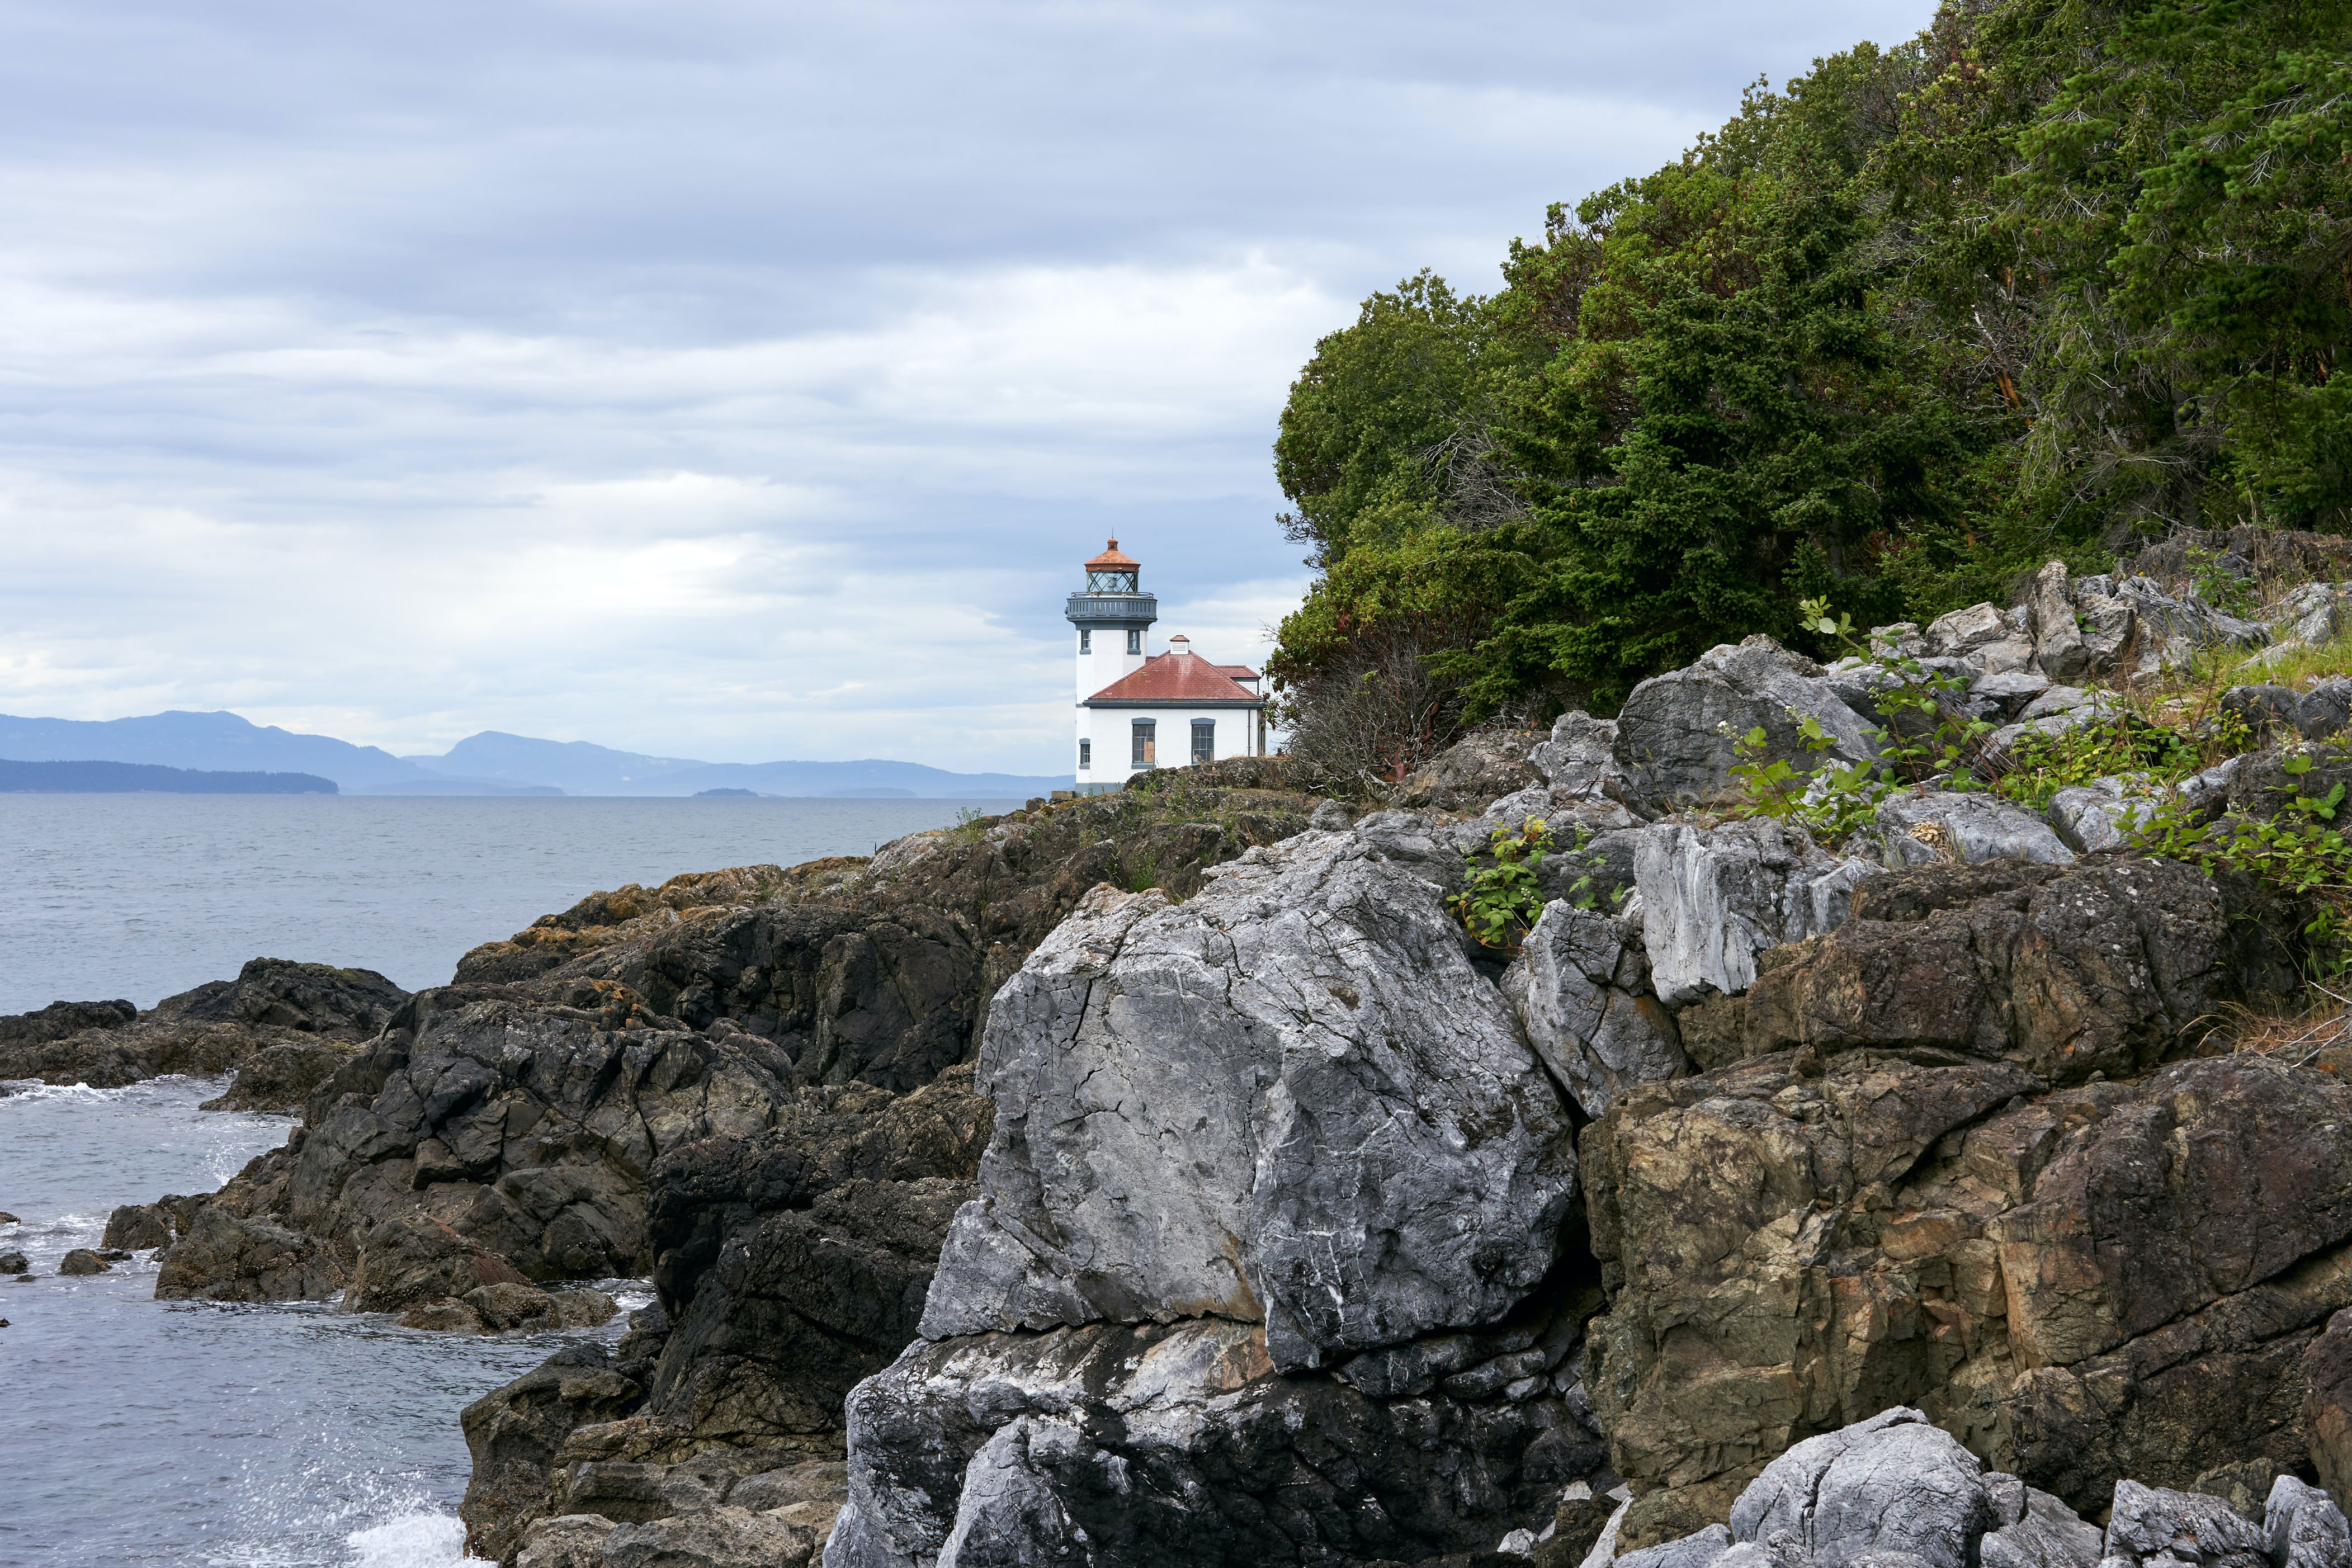 <p>The San Juan Islands are located off the coast of Washington State. The islands are best known for the abundant wildlife, stunning landscapes and tranquil island life.</p><p><strong>Highlights:</strong> Friday Harbor, Art Galleries, Salish Sea sunsets</p><p><strong>Activities to Enjoy:</strong> Whale watching, kayaking, hiking, photography</p>